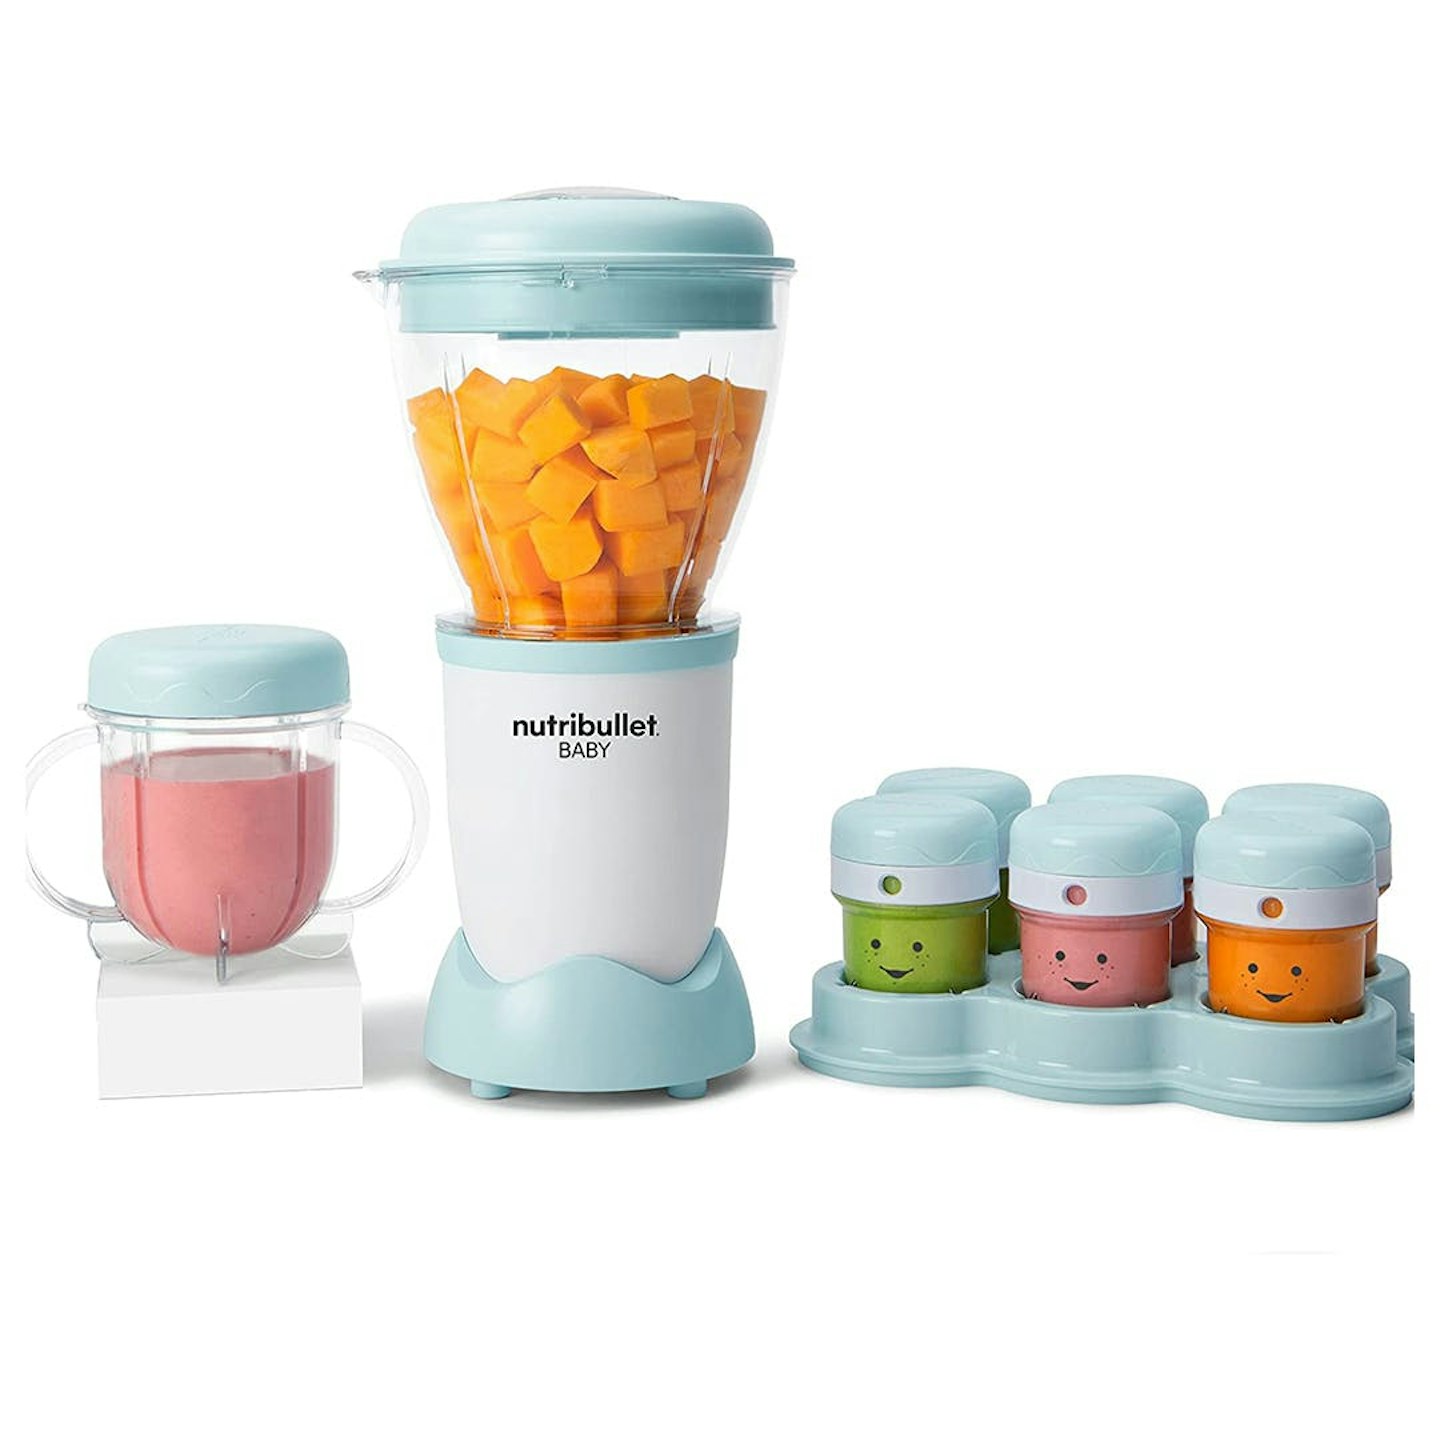 Babymoov Nutribaby One Baby Food Maker review - Bottles & accessories -  Feeding Products